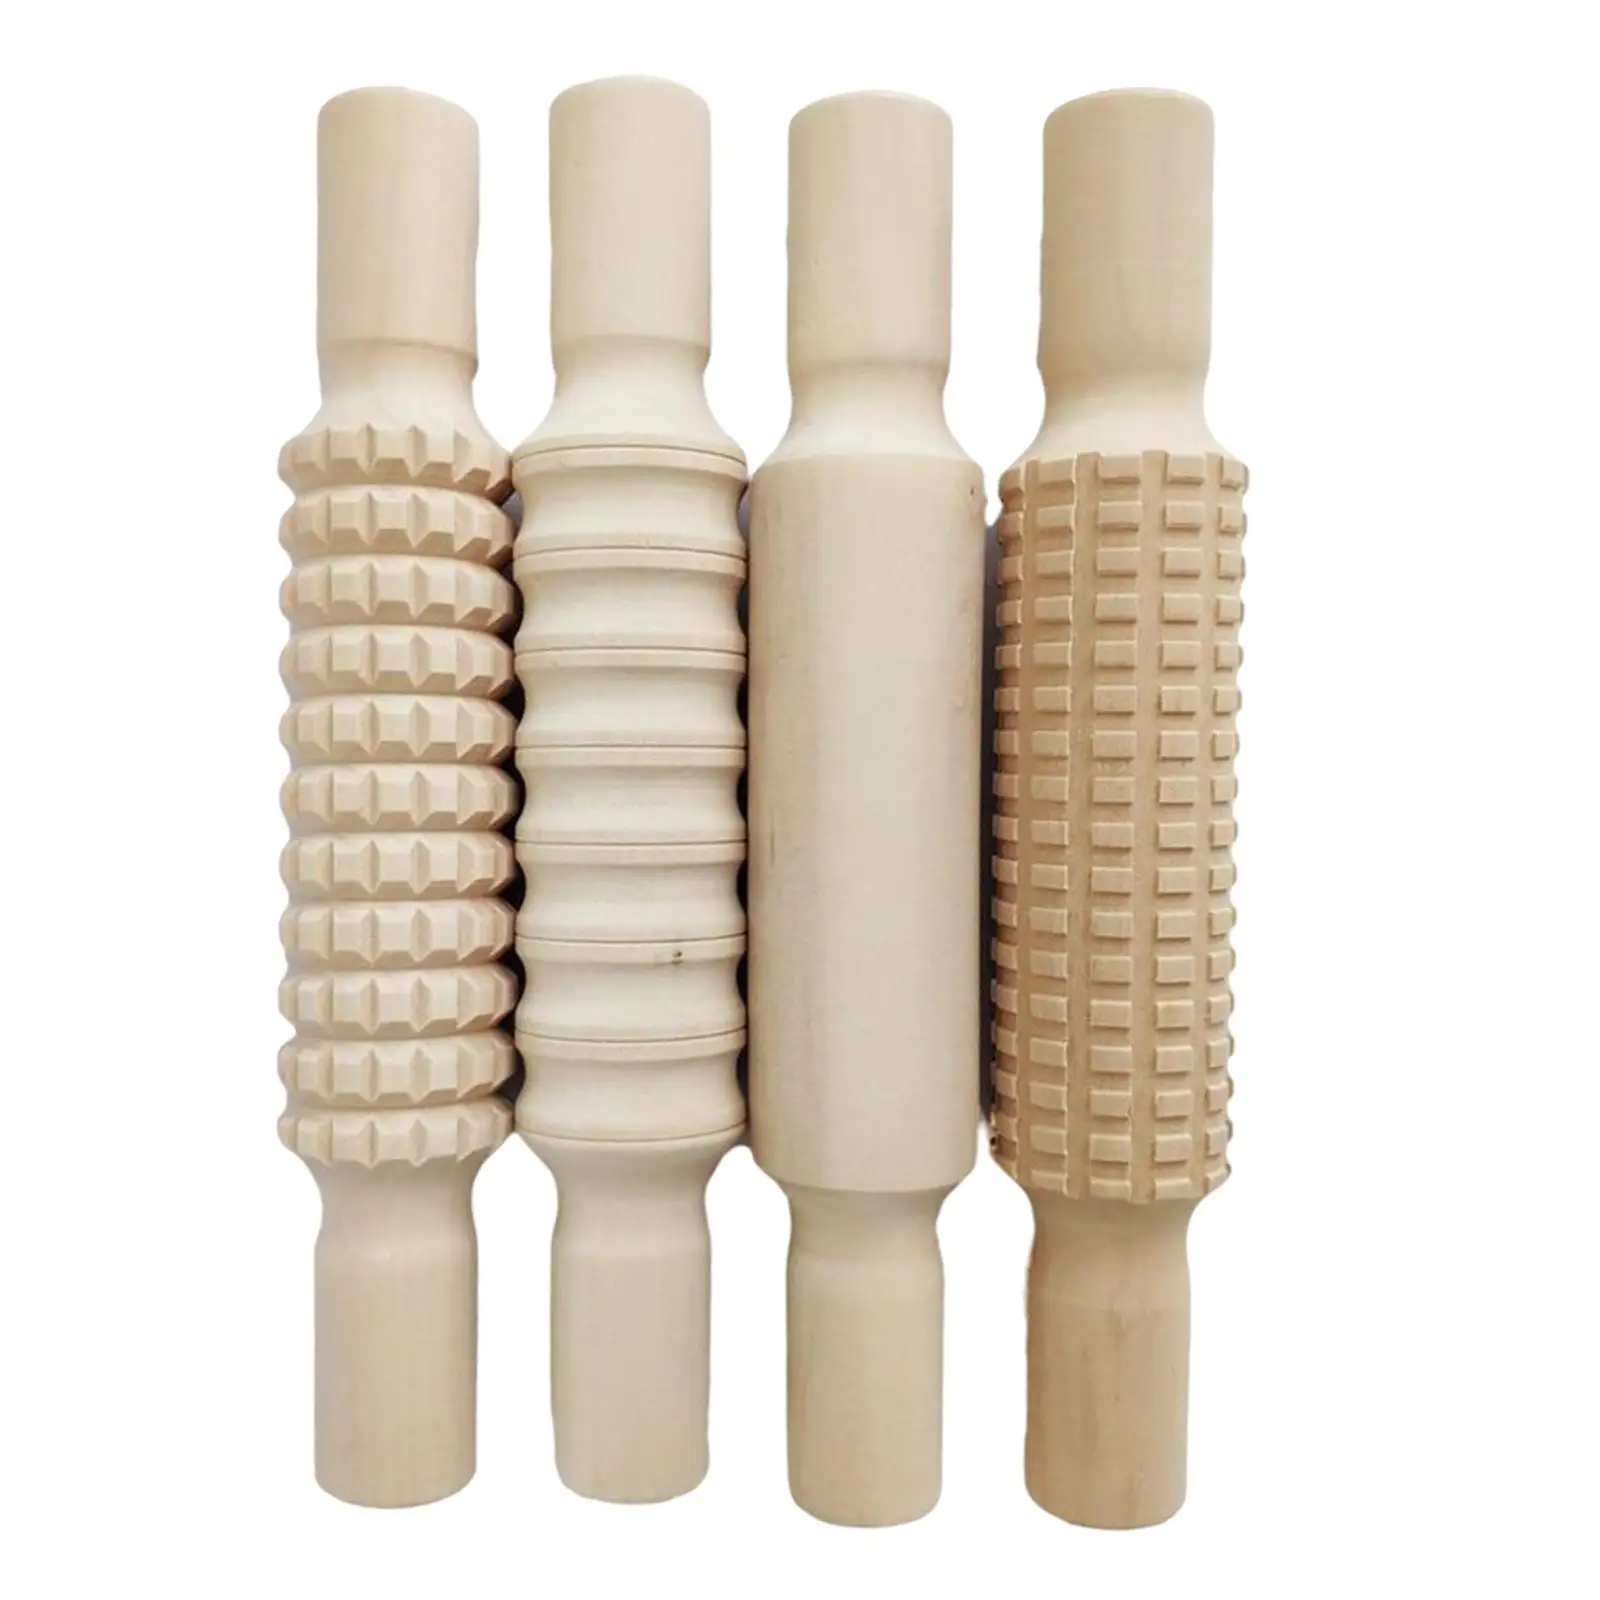 4 Pieces Wooden Clay Rolling pin Clay Accessories Tools Children Gift Clay Modelling Roller Sticks